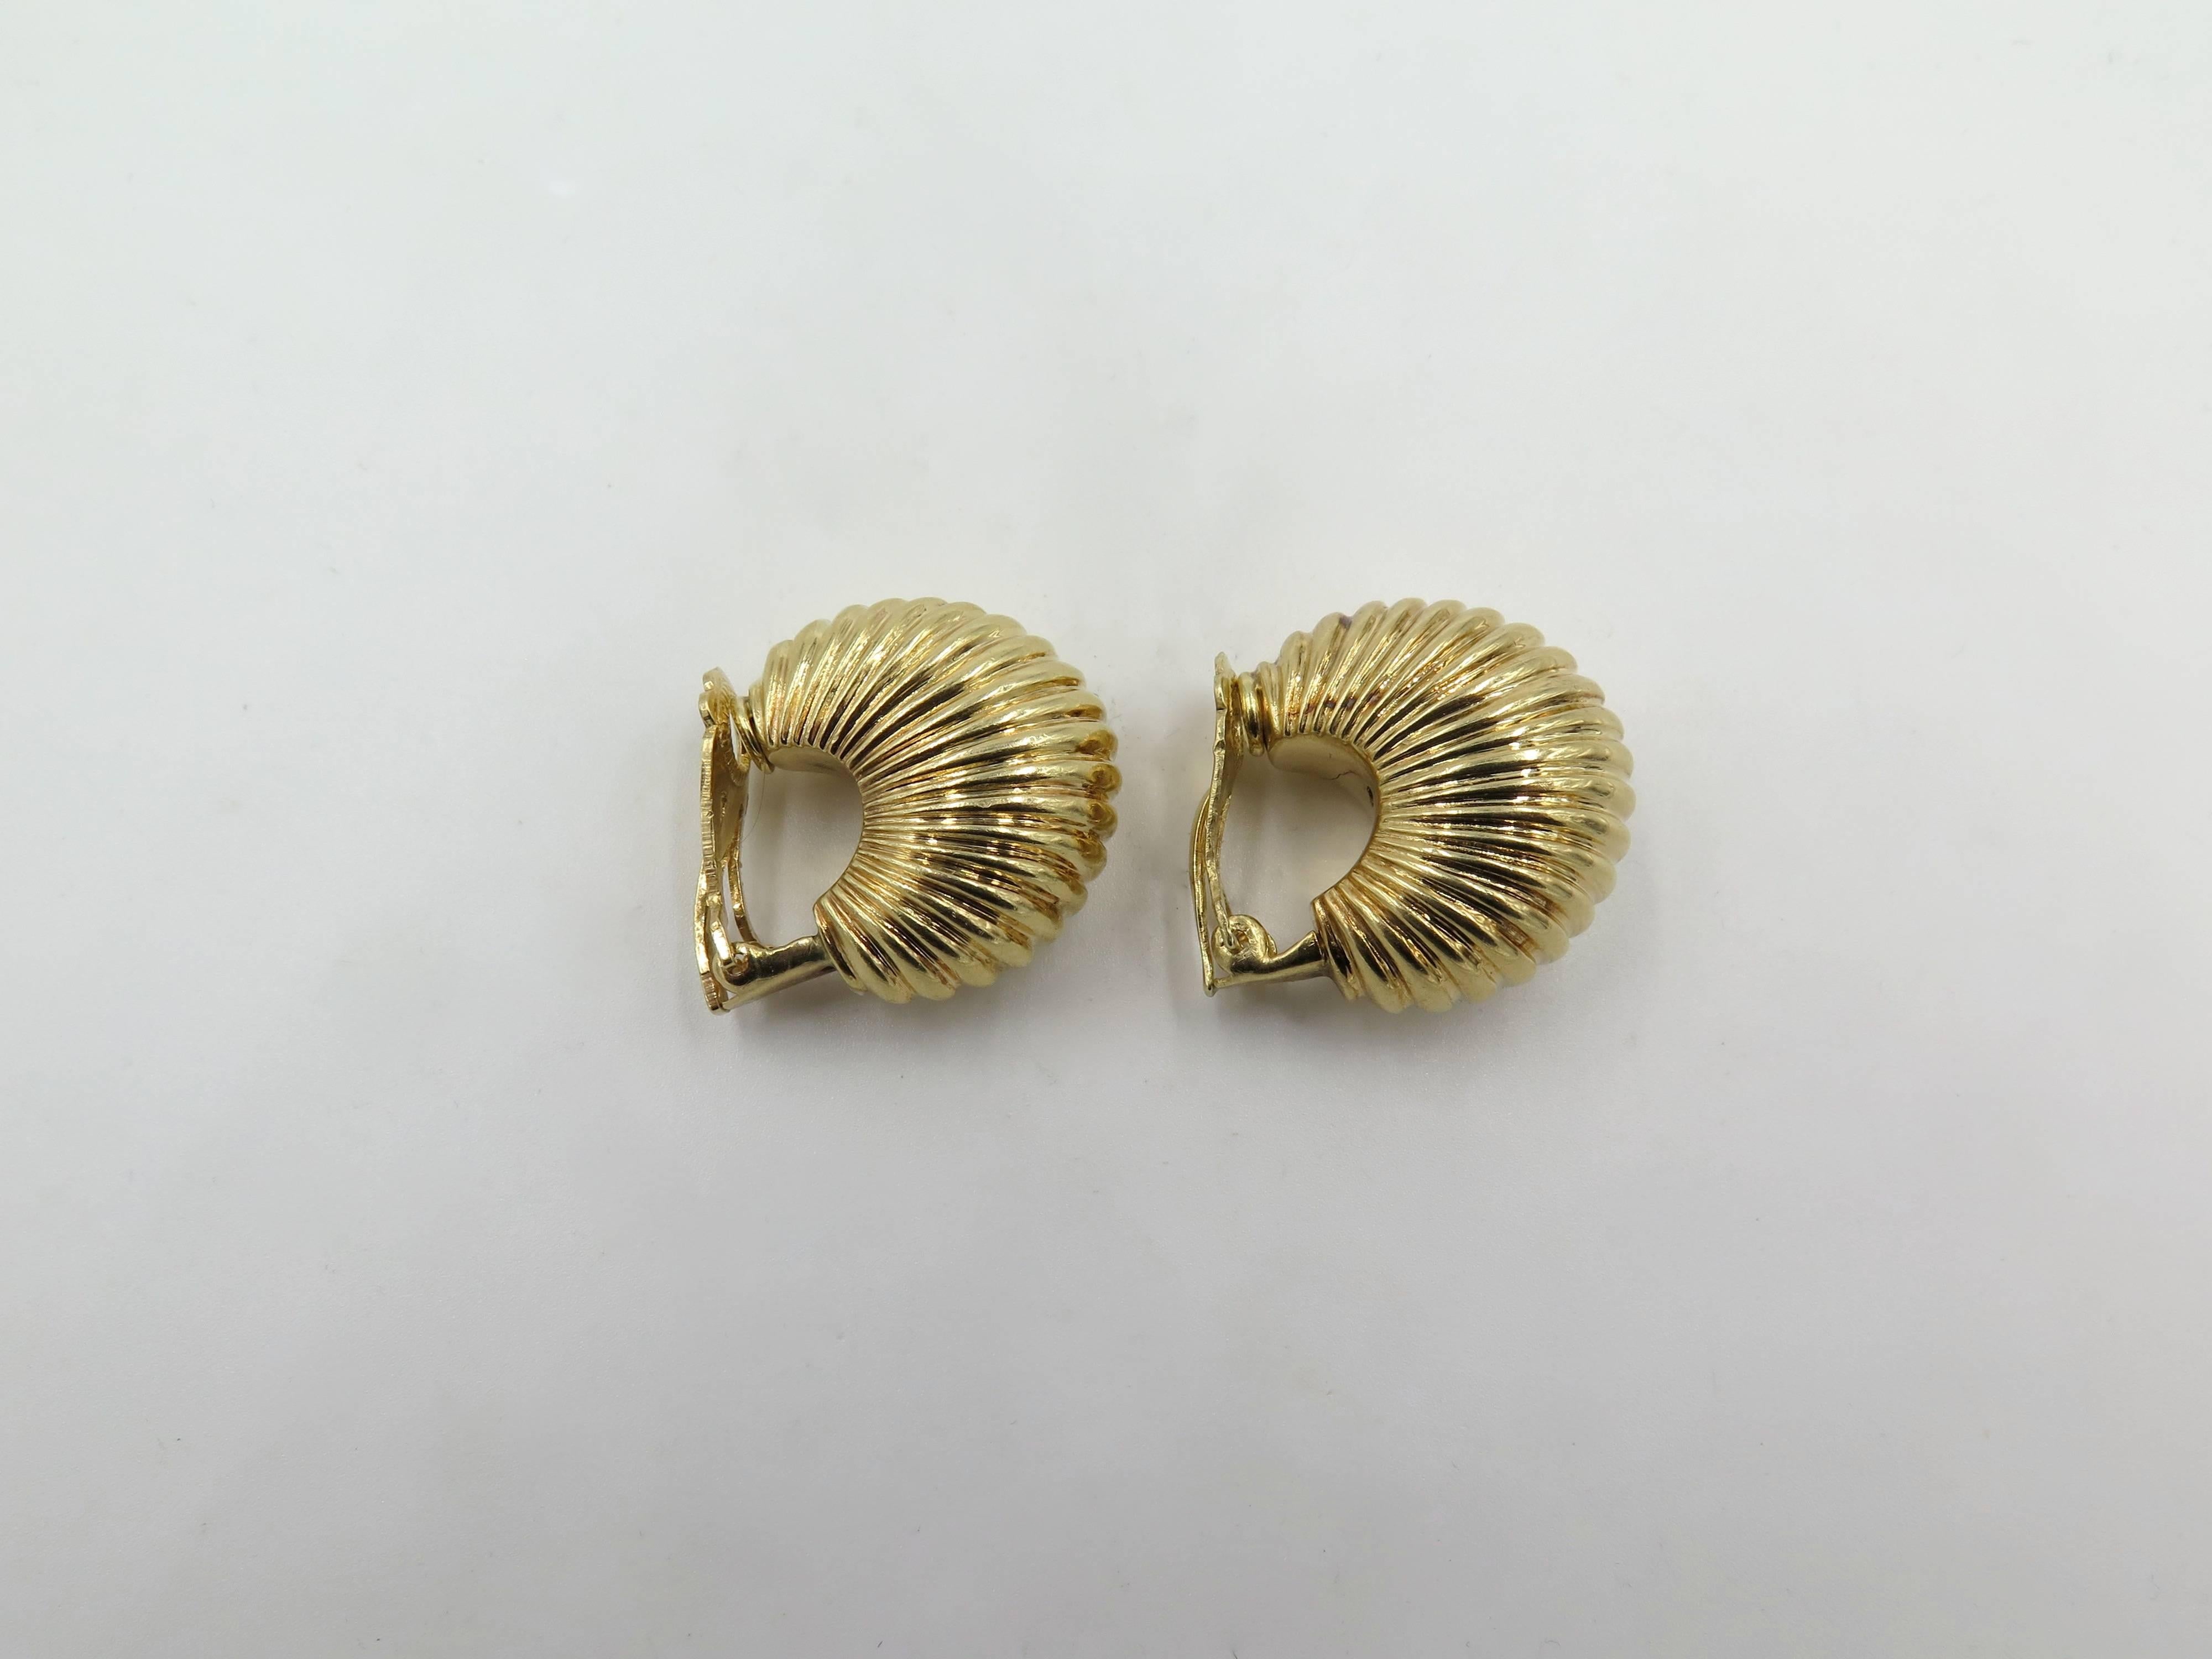 A pair of 14 karat yellow gold earrings. Circa 1950. Of fluted bombe half hoop design. Length is approximately 1 inch. Gross weight is approximately 23.7 grams. 